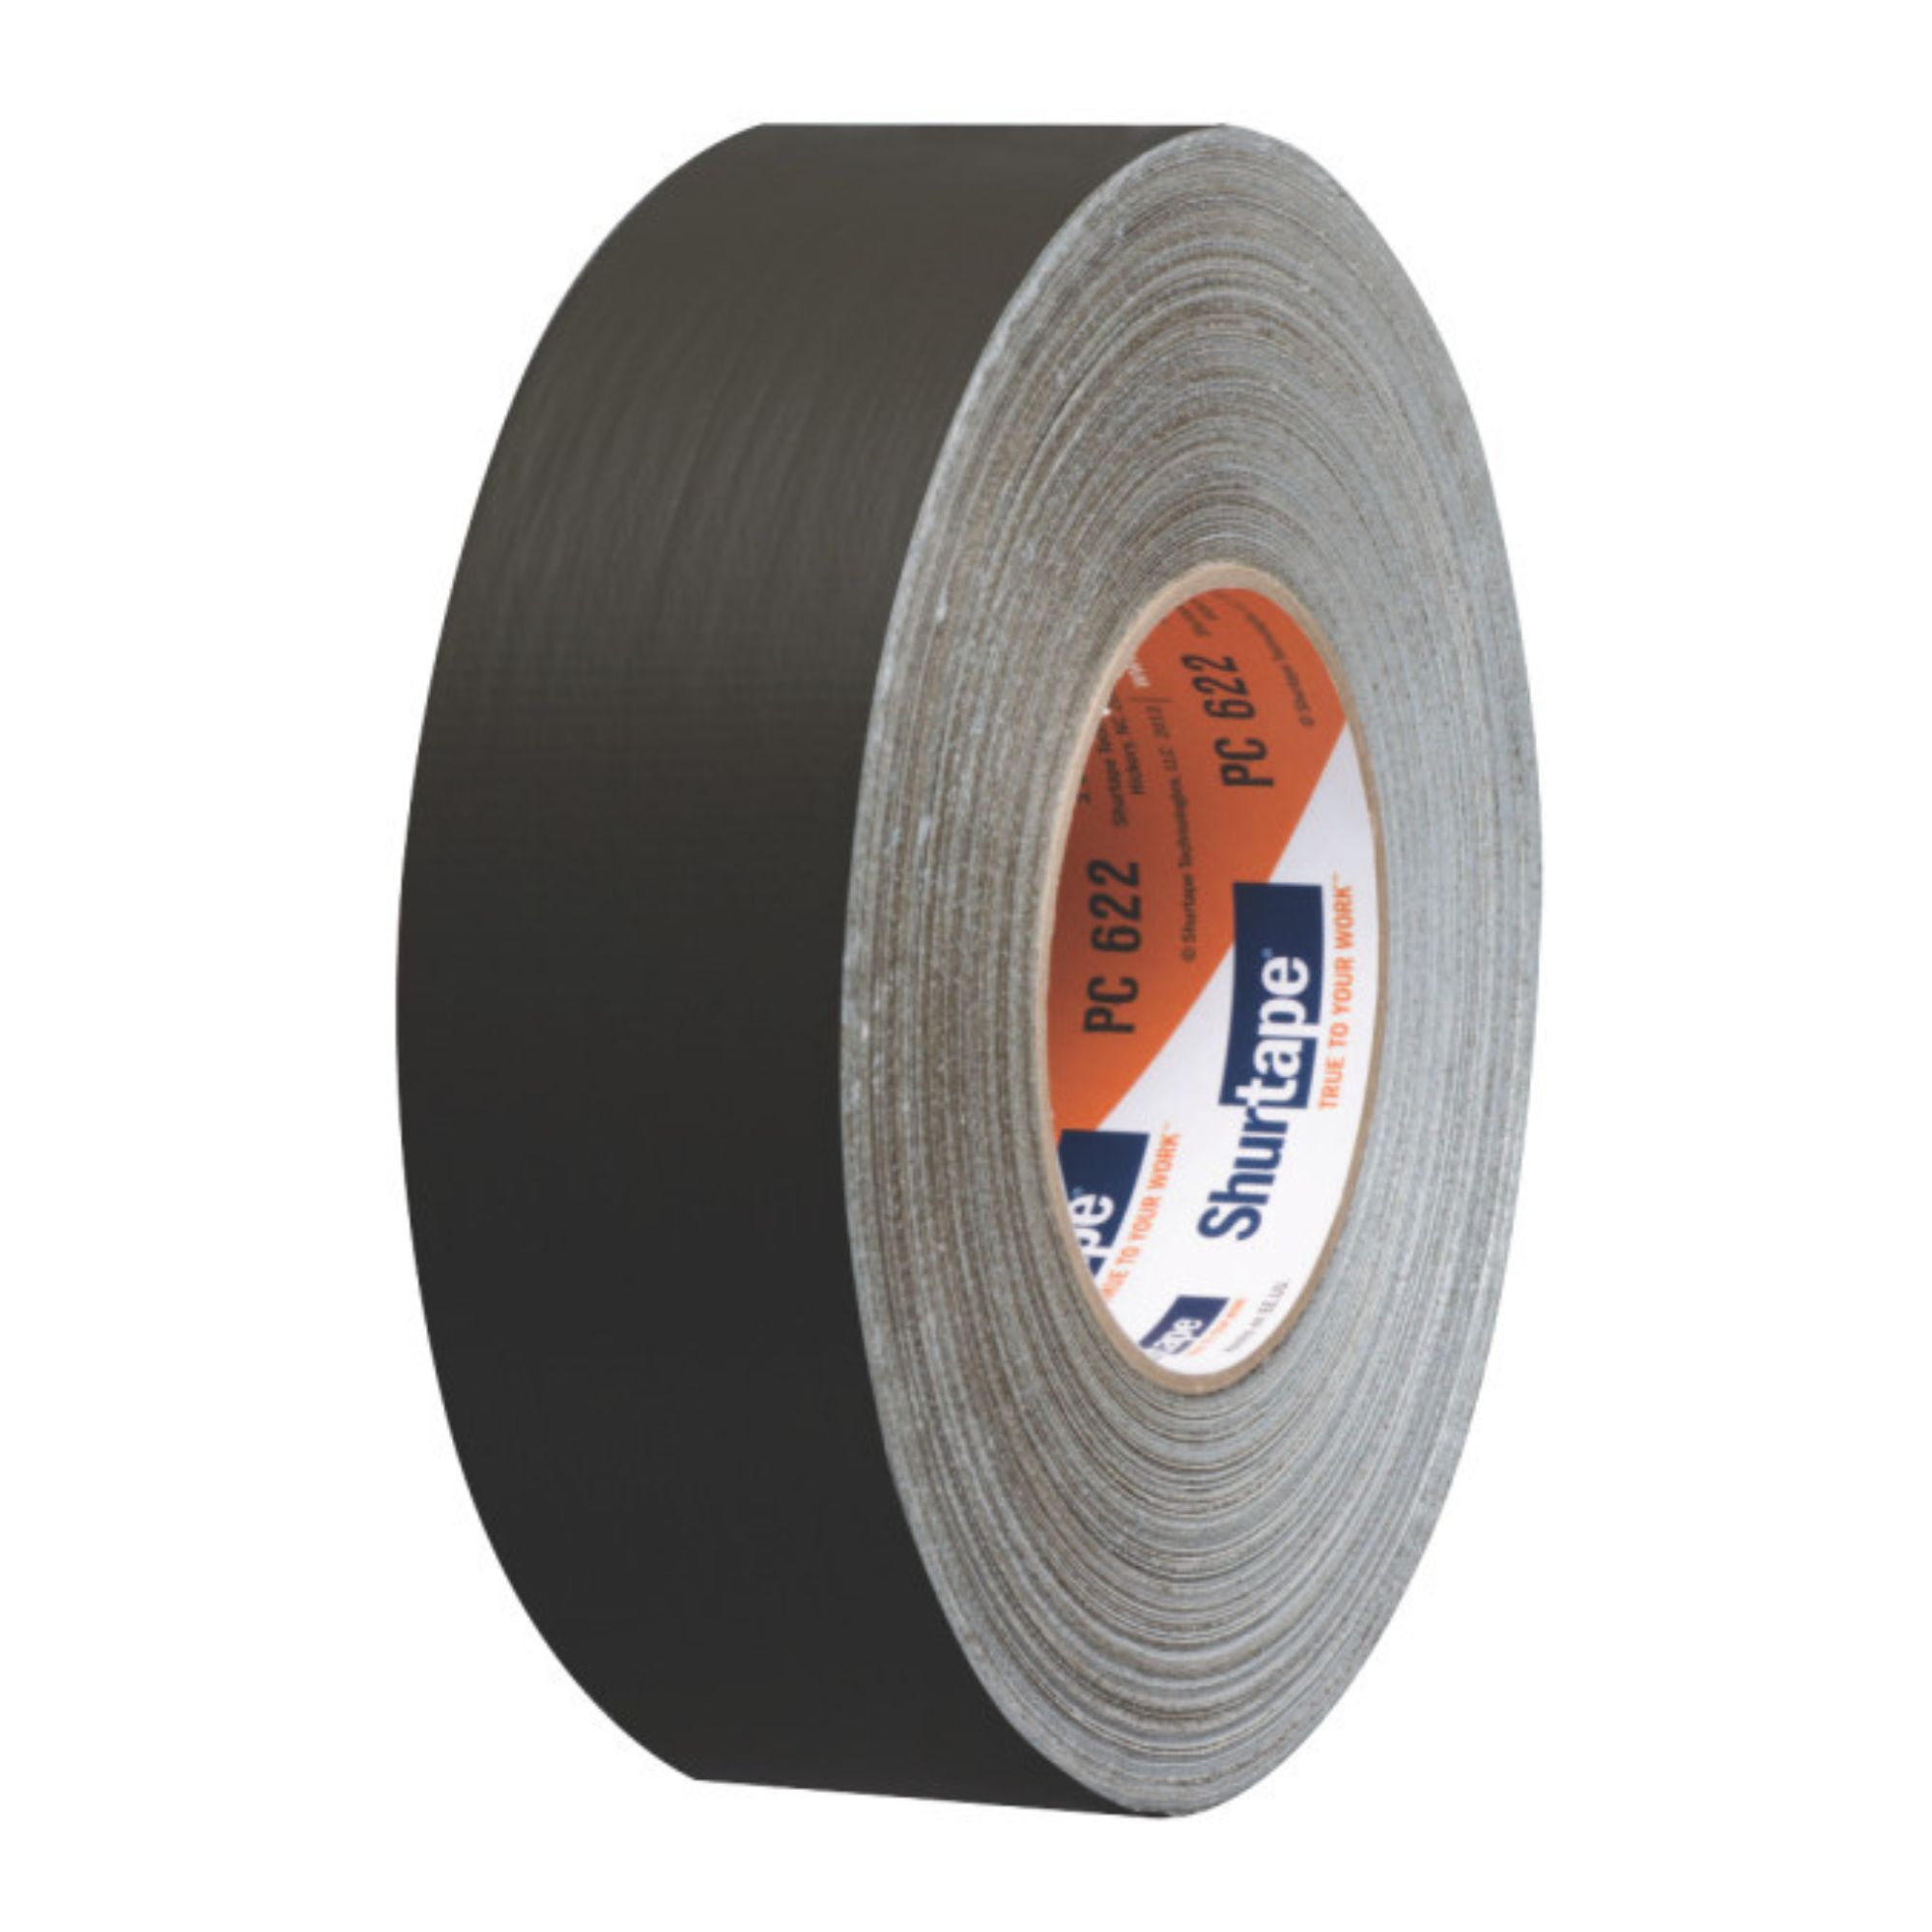 SHURTAPE PC-622 RED 1.5 in x 60 yds Premium-Grade Stucco Duct Tape